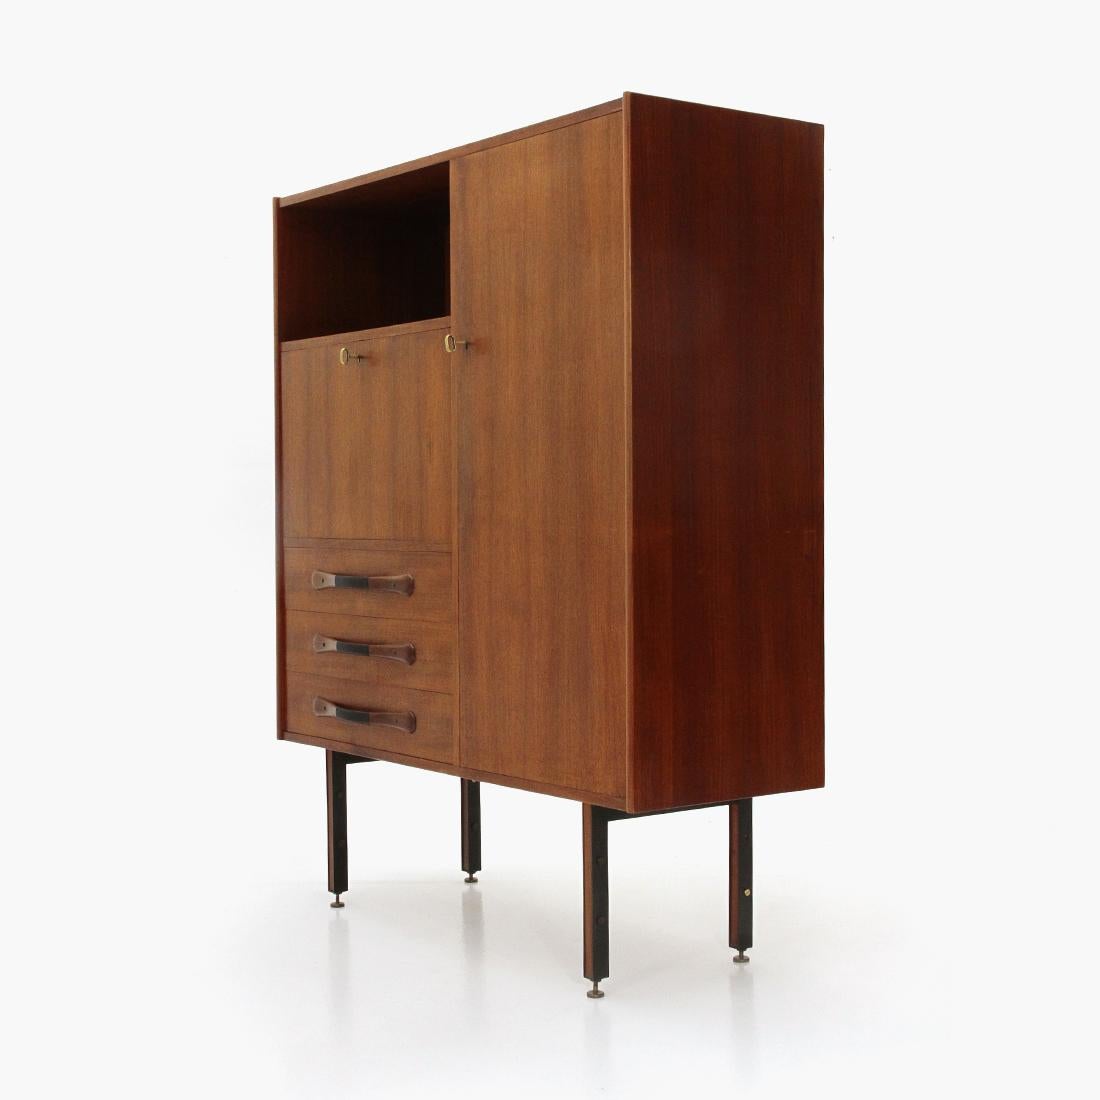 Sideboard of Italian manufacture produced in the 1960s.
Structure in teak veneered wood.
Three drawers with curved wooden handles with black stained rattan coating.
Open compartment.
Compartment with flap and internal shelf, closure with